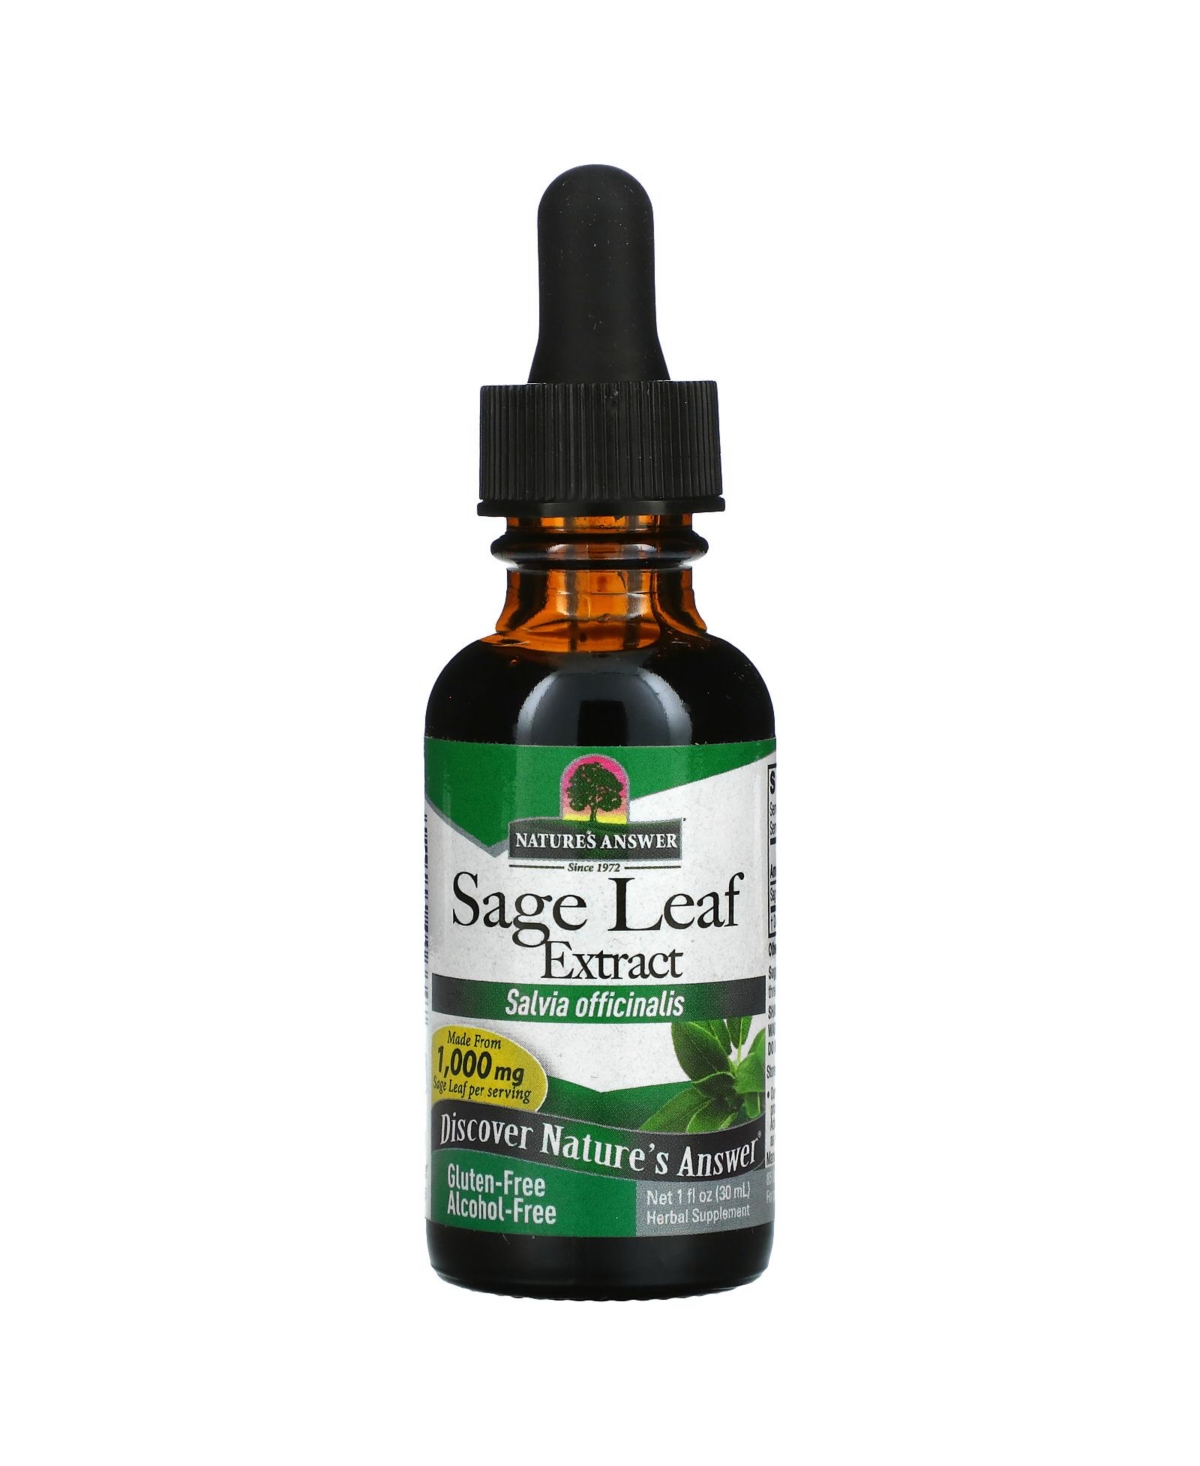 Sage Leaf Extract Alcohol-Free 1 000 mg - 1 fl oz (30 ml) - Assorted Pre-pack (See Table